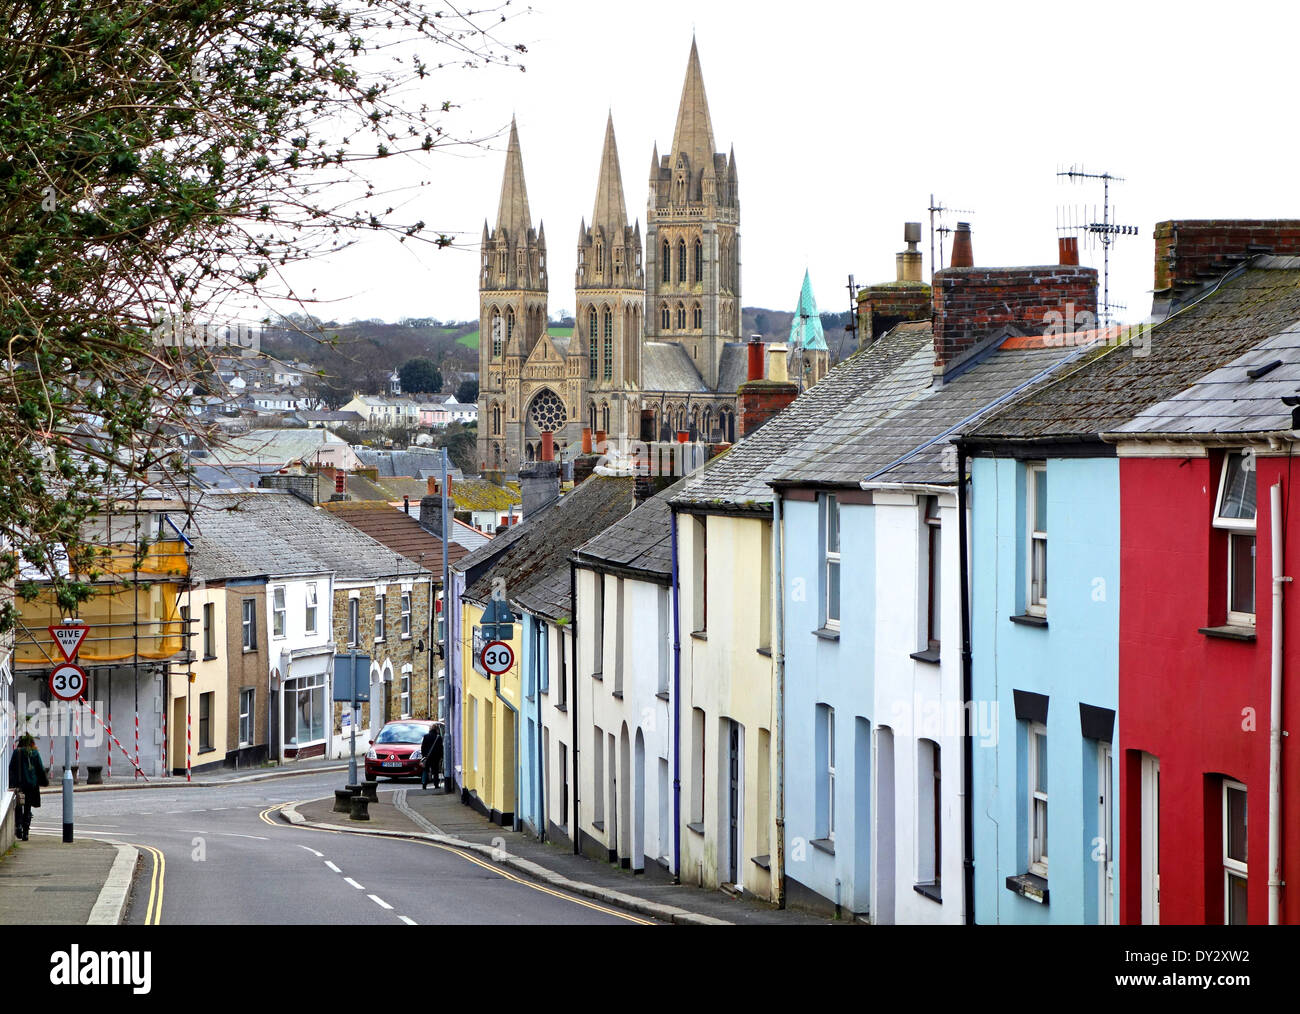 The city of Truro in Cornwall, UK Stock Photo: 68291806 - Alamy